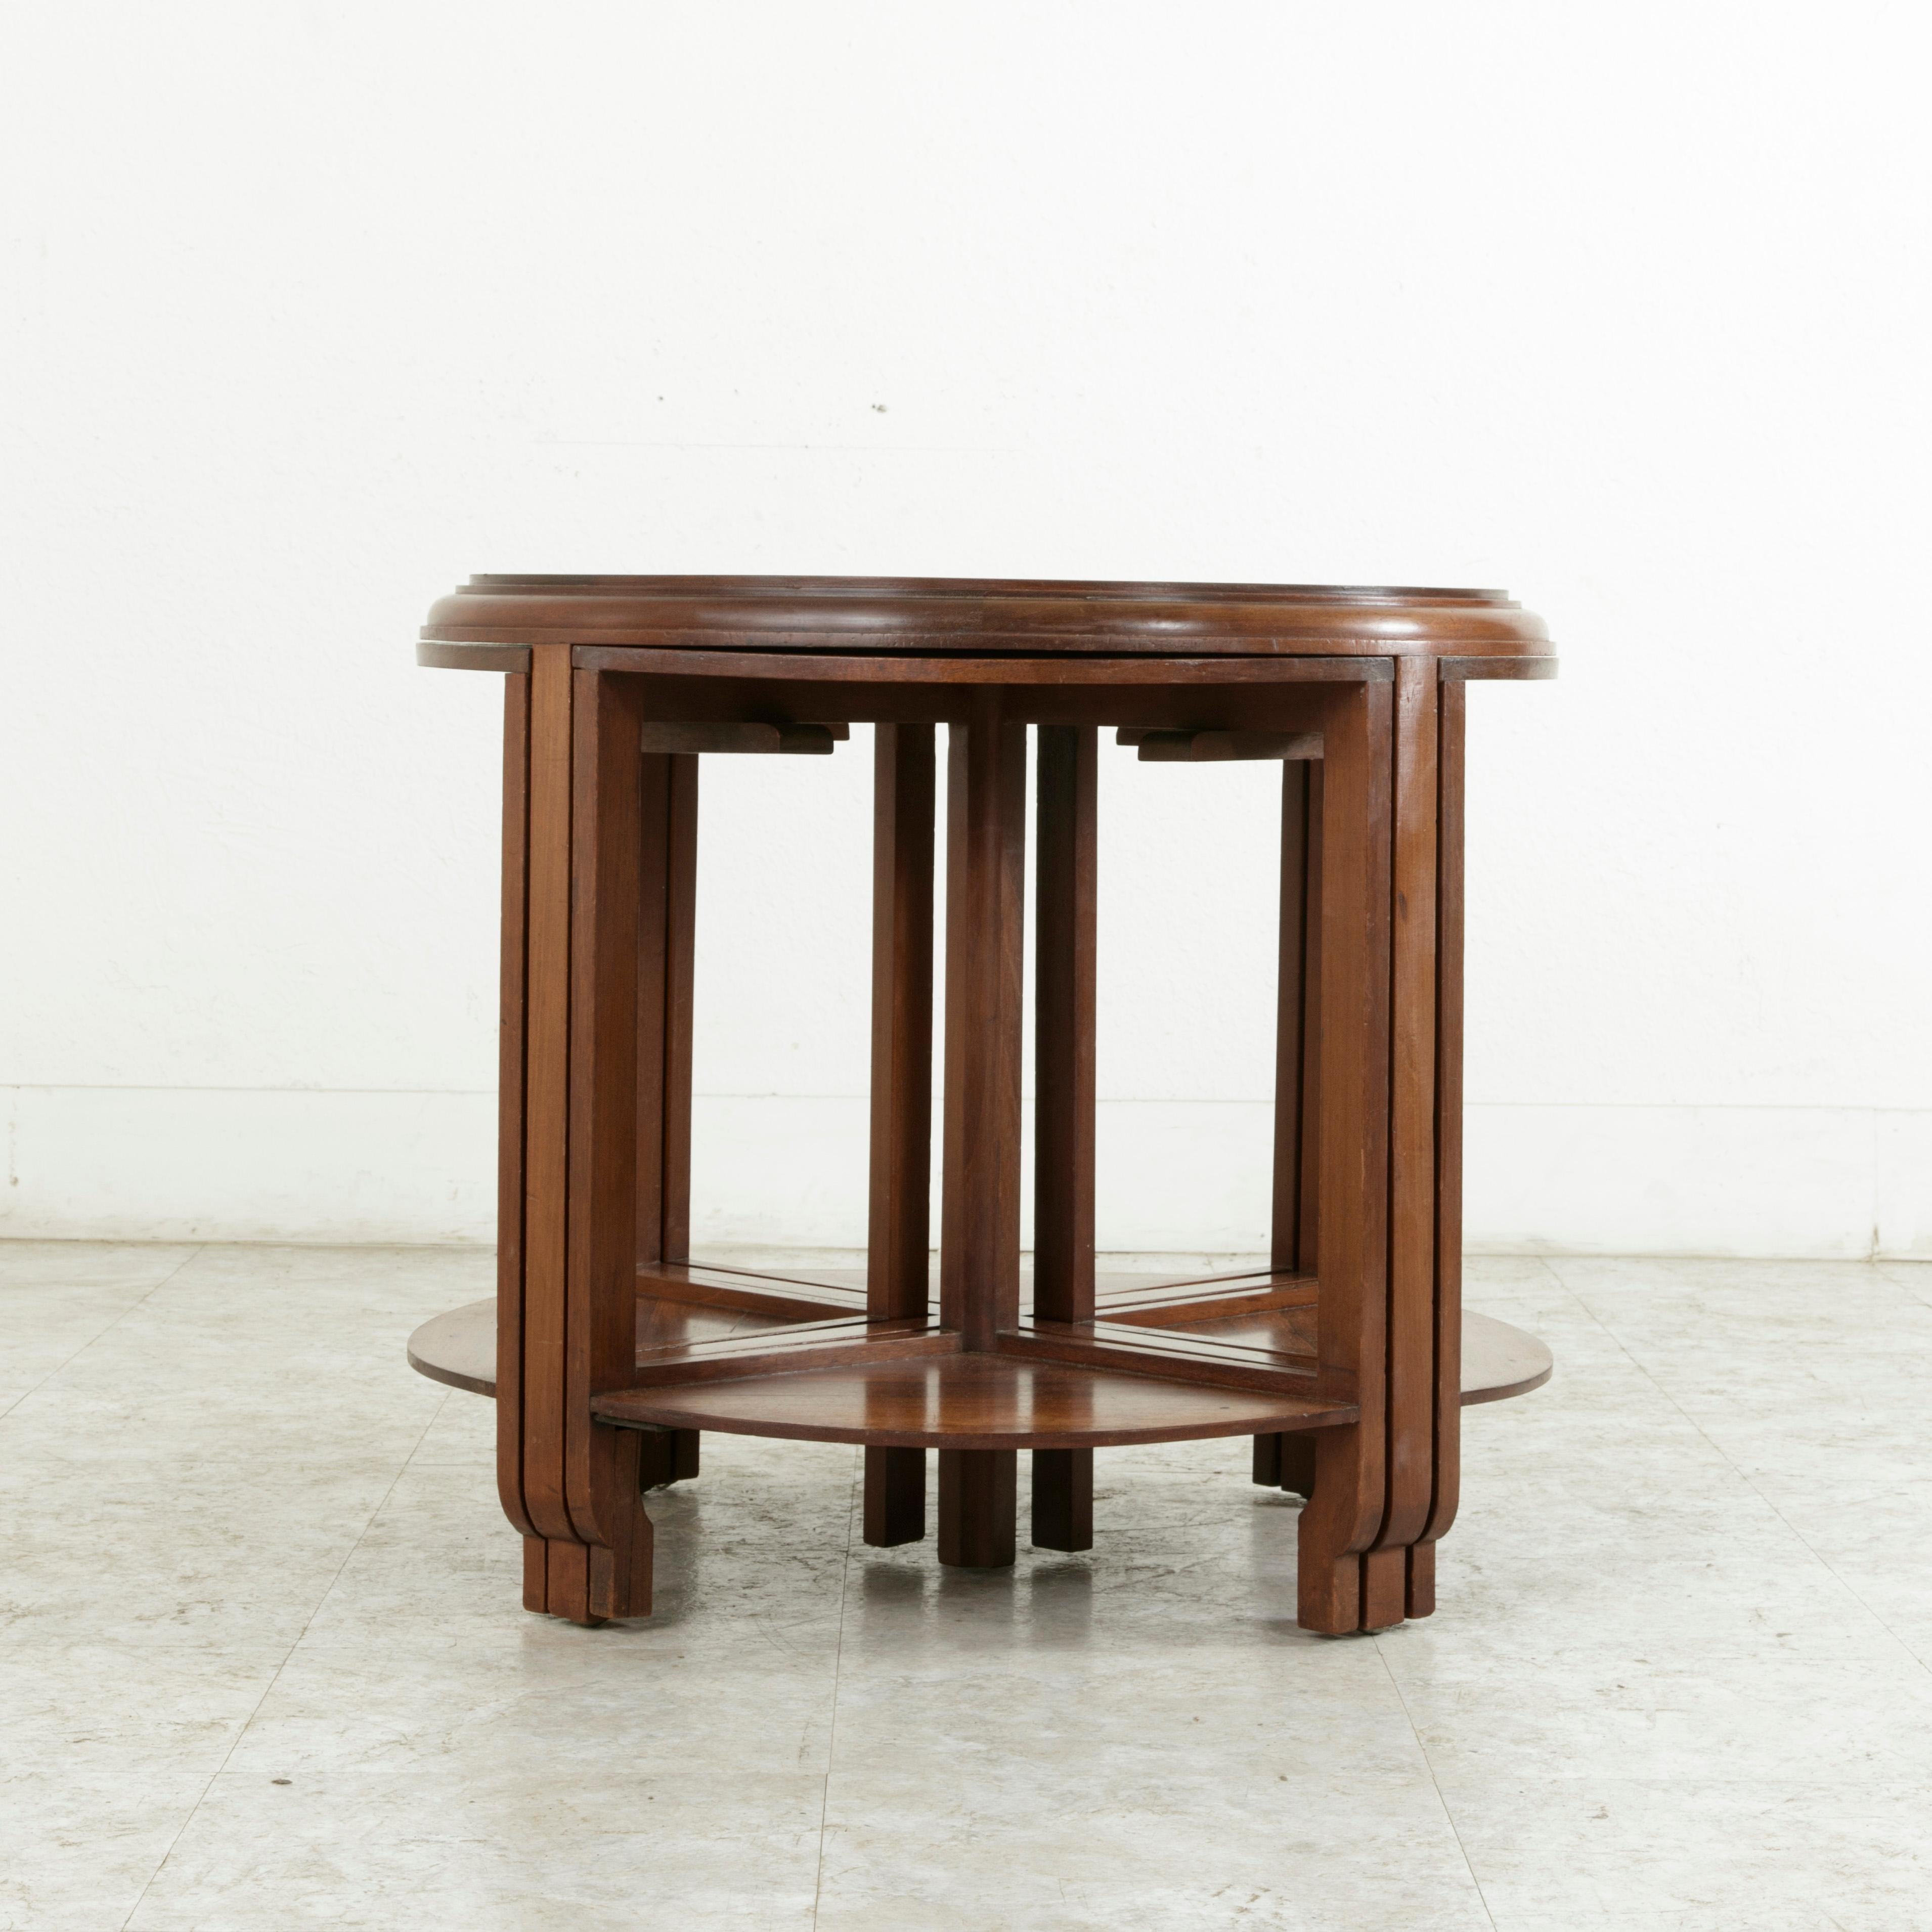 Early 20th Century French Art Deco Louis Majorelle Coffee Table, Nesting Tables For Sale 2